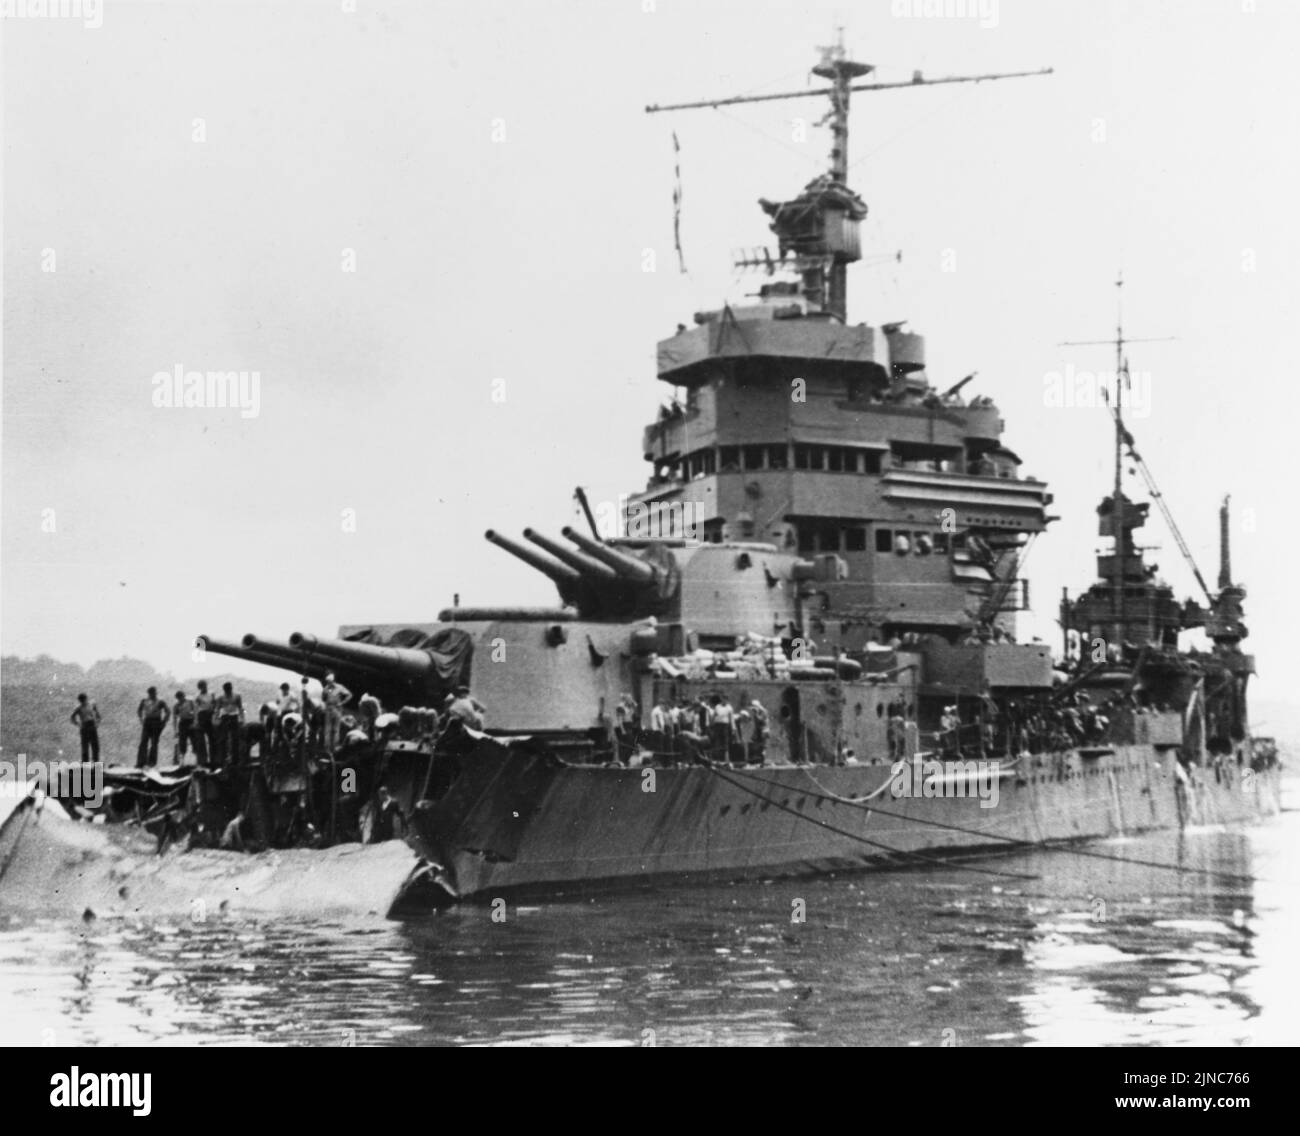 The U.S. Navy heavy cruiser USS Minneapolis (CA-36) at Tulagi with torpedo damage received in the Battle of Tassafaronga, the night before. The photograph was taken on 1 December 1942, as work began to cut away the wreckage of her bow. Stock Photo